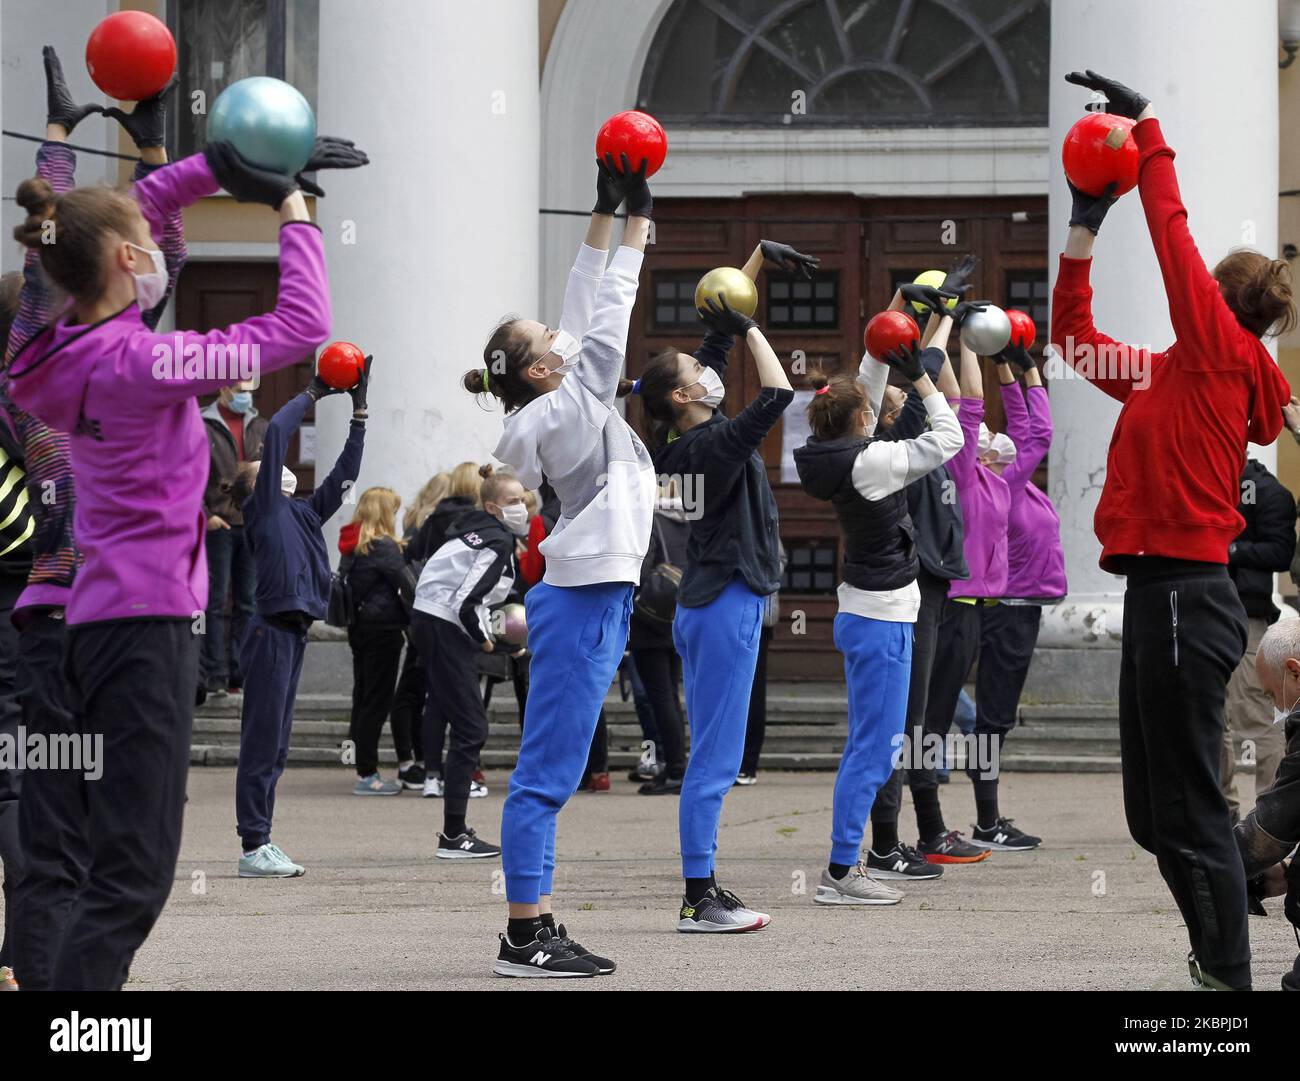 Gymnasts of the Deriugina School wearing protective masks amid the Covid-19 coronavirus epidemic take part at a trainning session in central Kyiv, Ukraine, on 01 June, 2020. Young gymnasts had a training on a street to support the 'Save Deriugina School' action, which was organized in support of Irina Deryugina children's and youth sports school of gymnastics. (Photo by STR/NurPhoto) Stock Photo